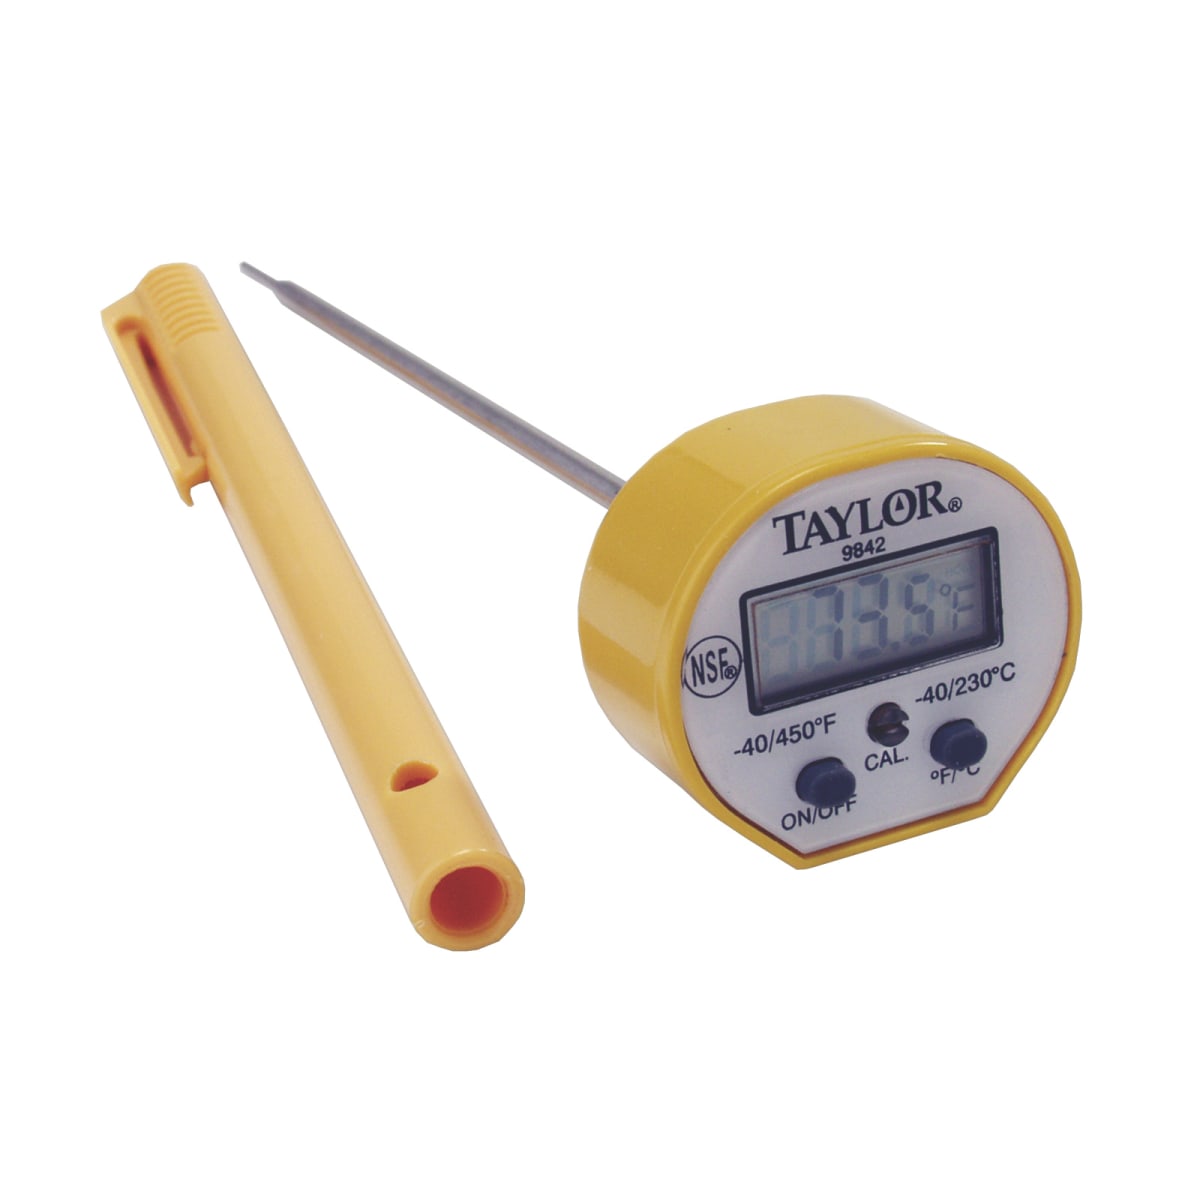 TAYLOR 1106 Analog Thermometer,-40 to 70 Degree F 